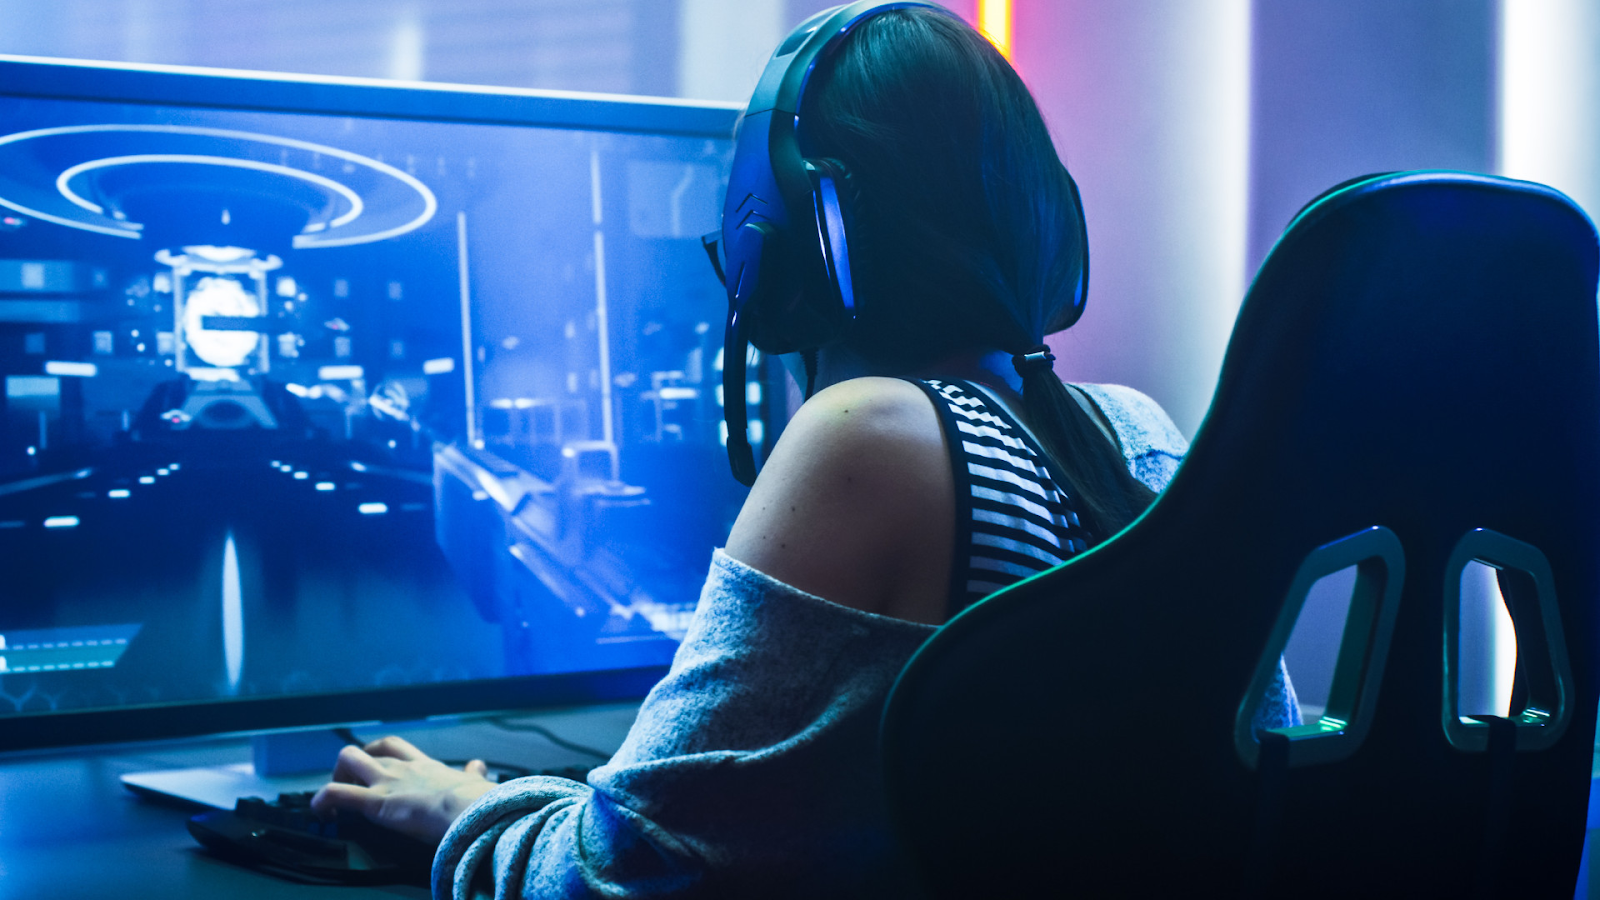 Indian gamers consider gaming as a viable career option: HP study - Asiana Times